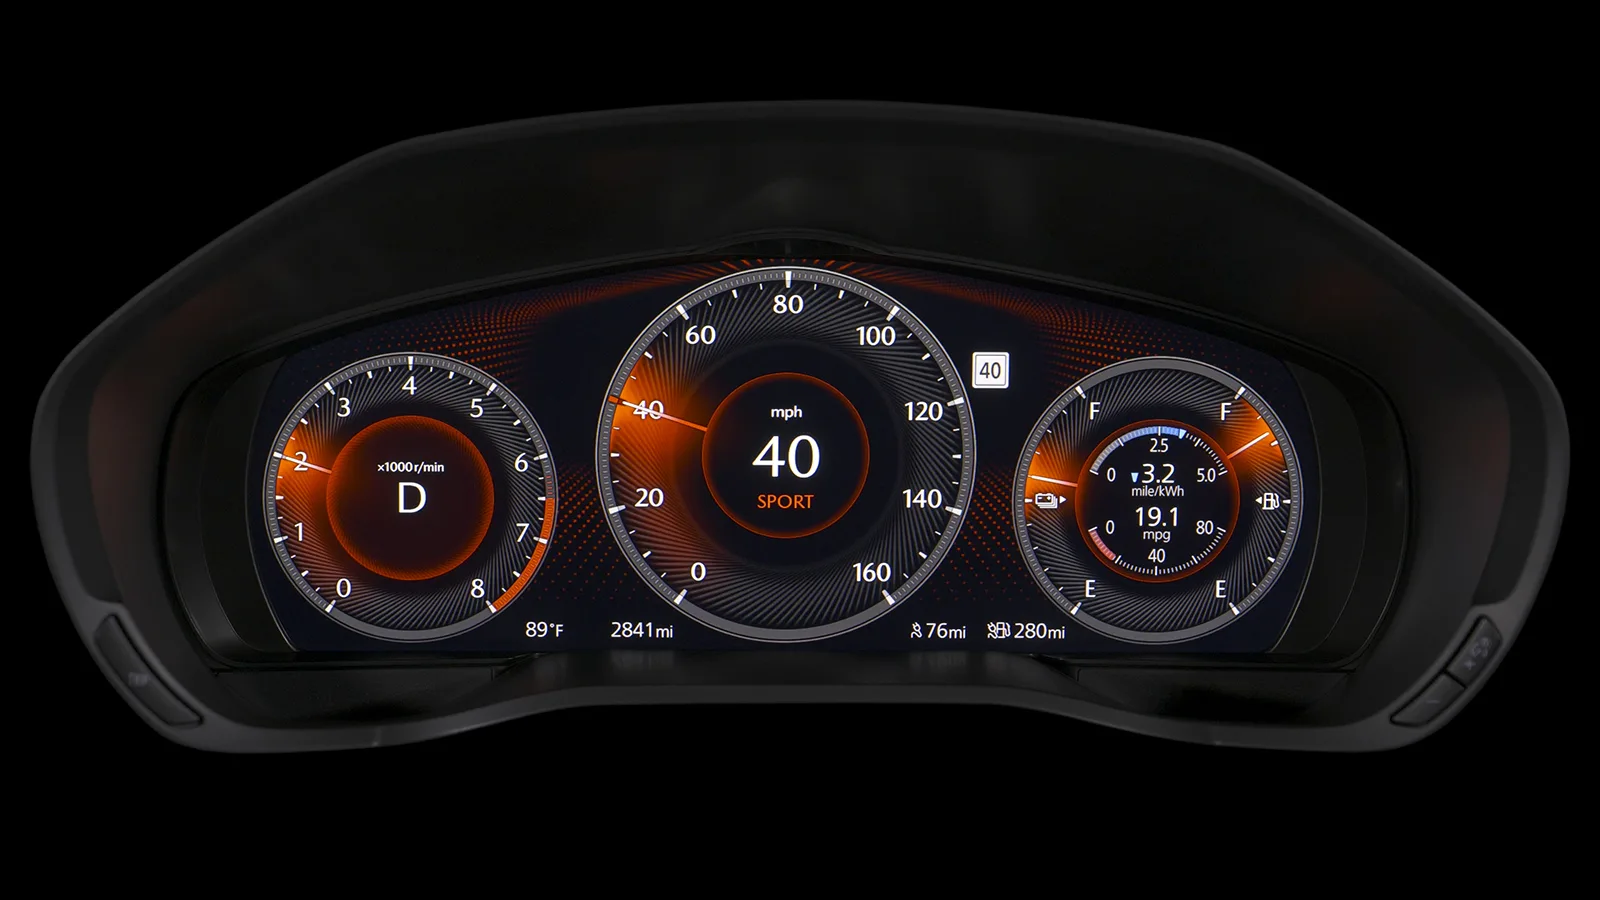 Panasonic and Mazda Unveil Cutting-Edge Display Technology in the CX-70 – Display Daily